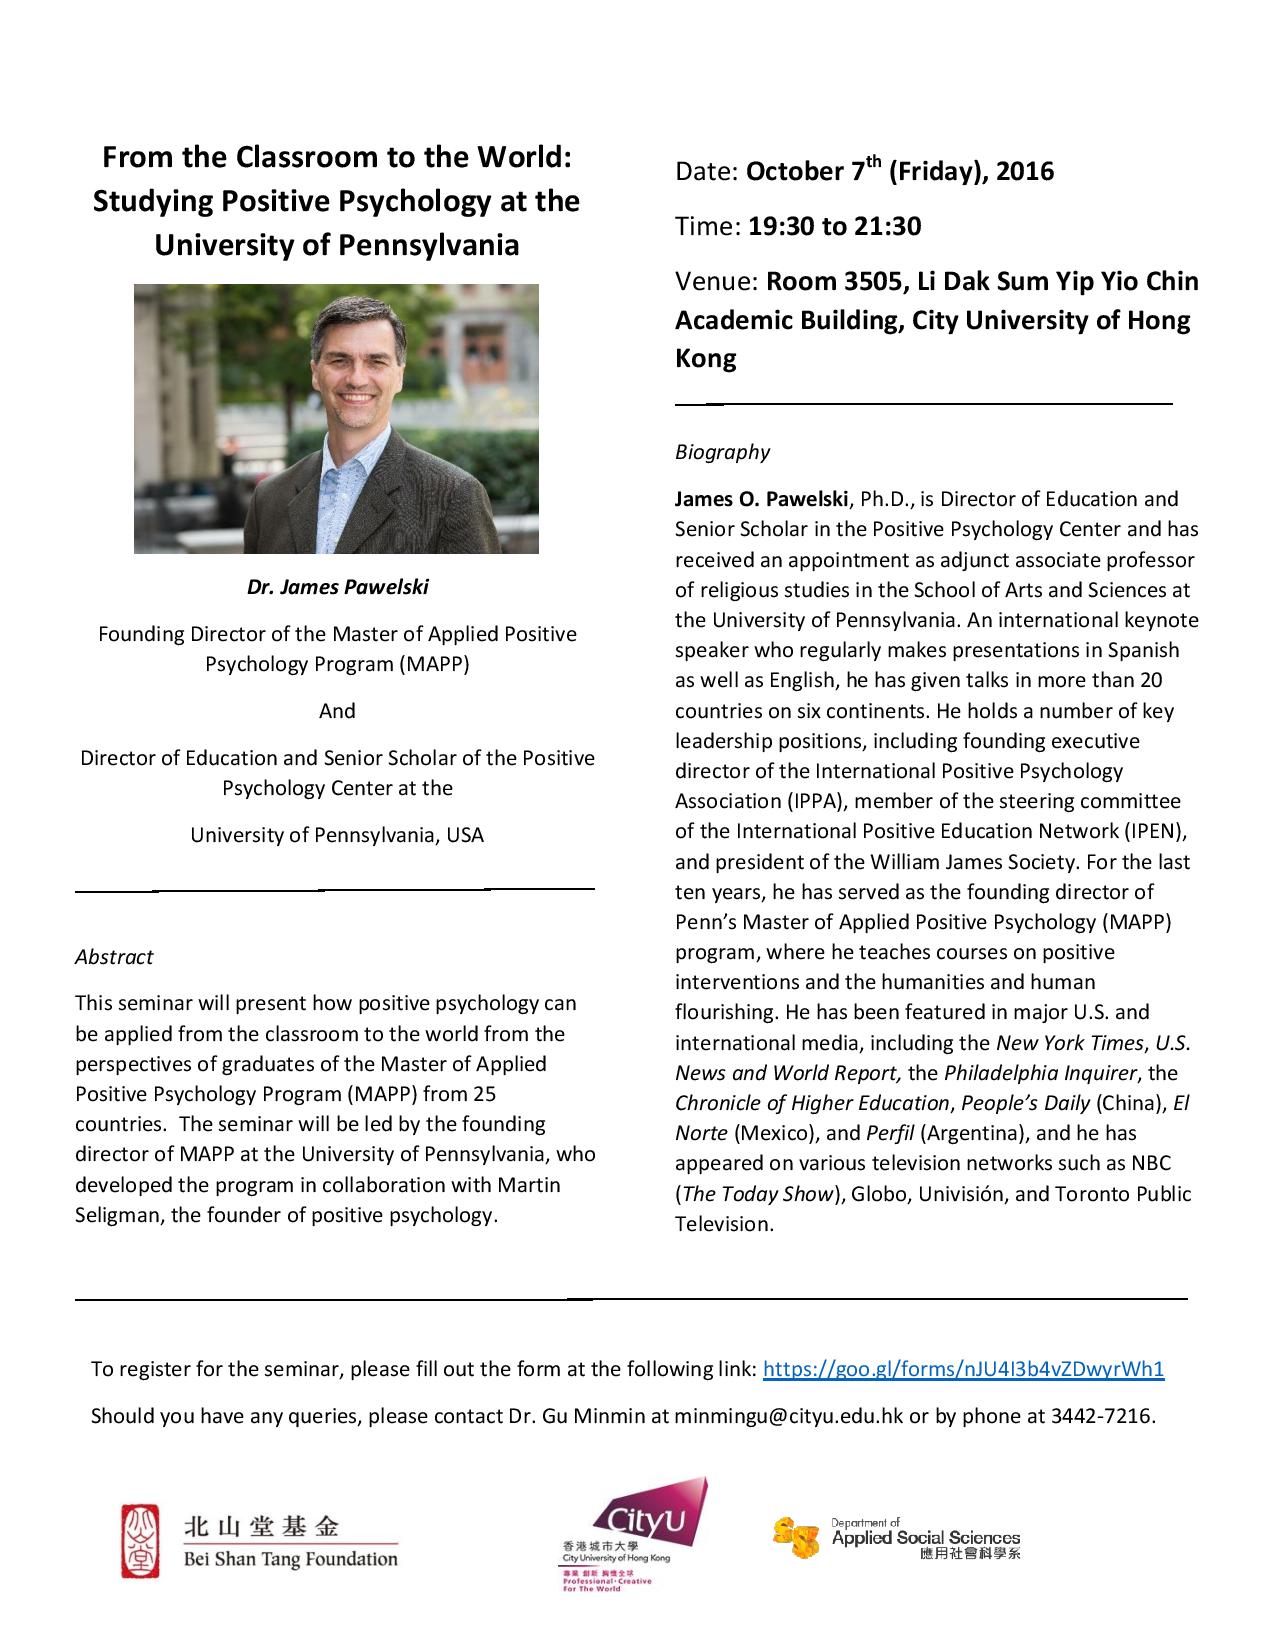 seminar From the Classroom to the World: Studying Positive Psychology at the University of Pennsylvania